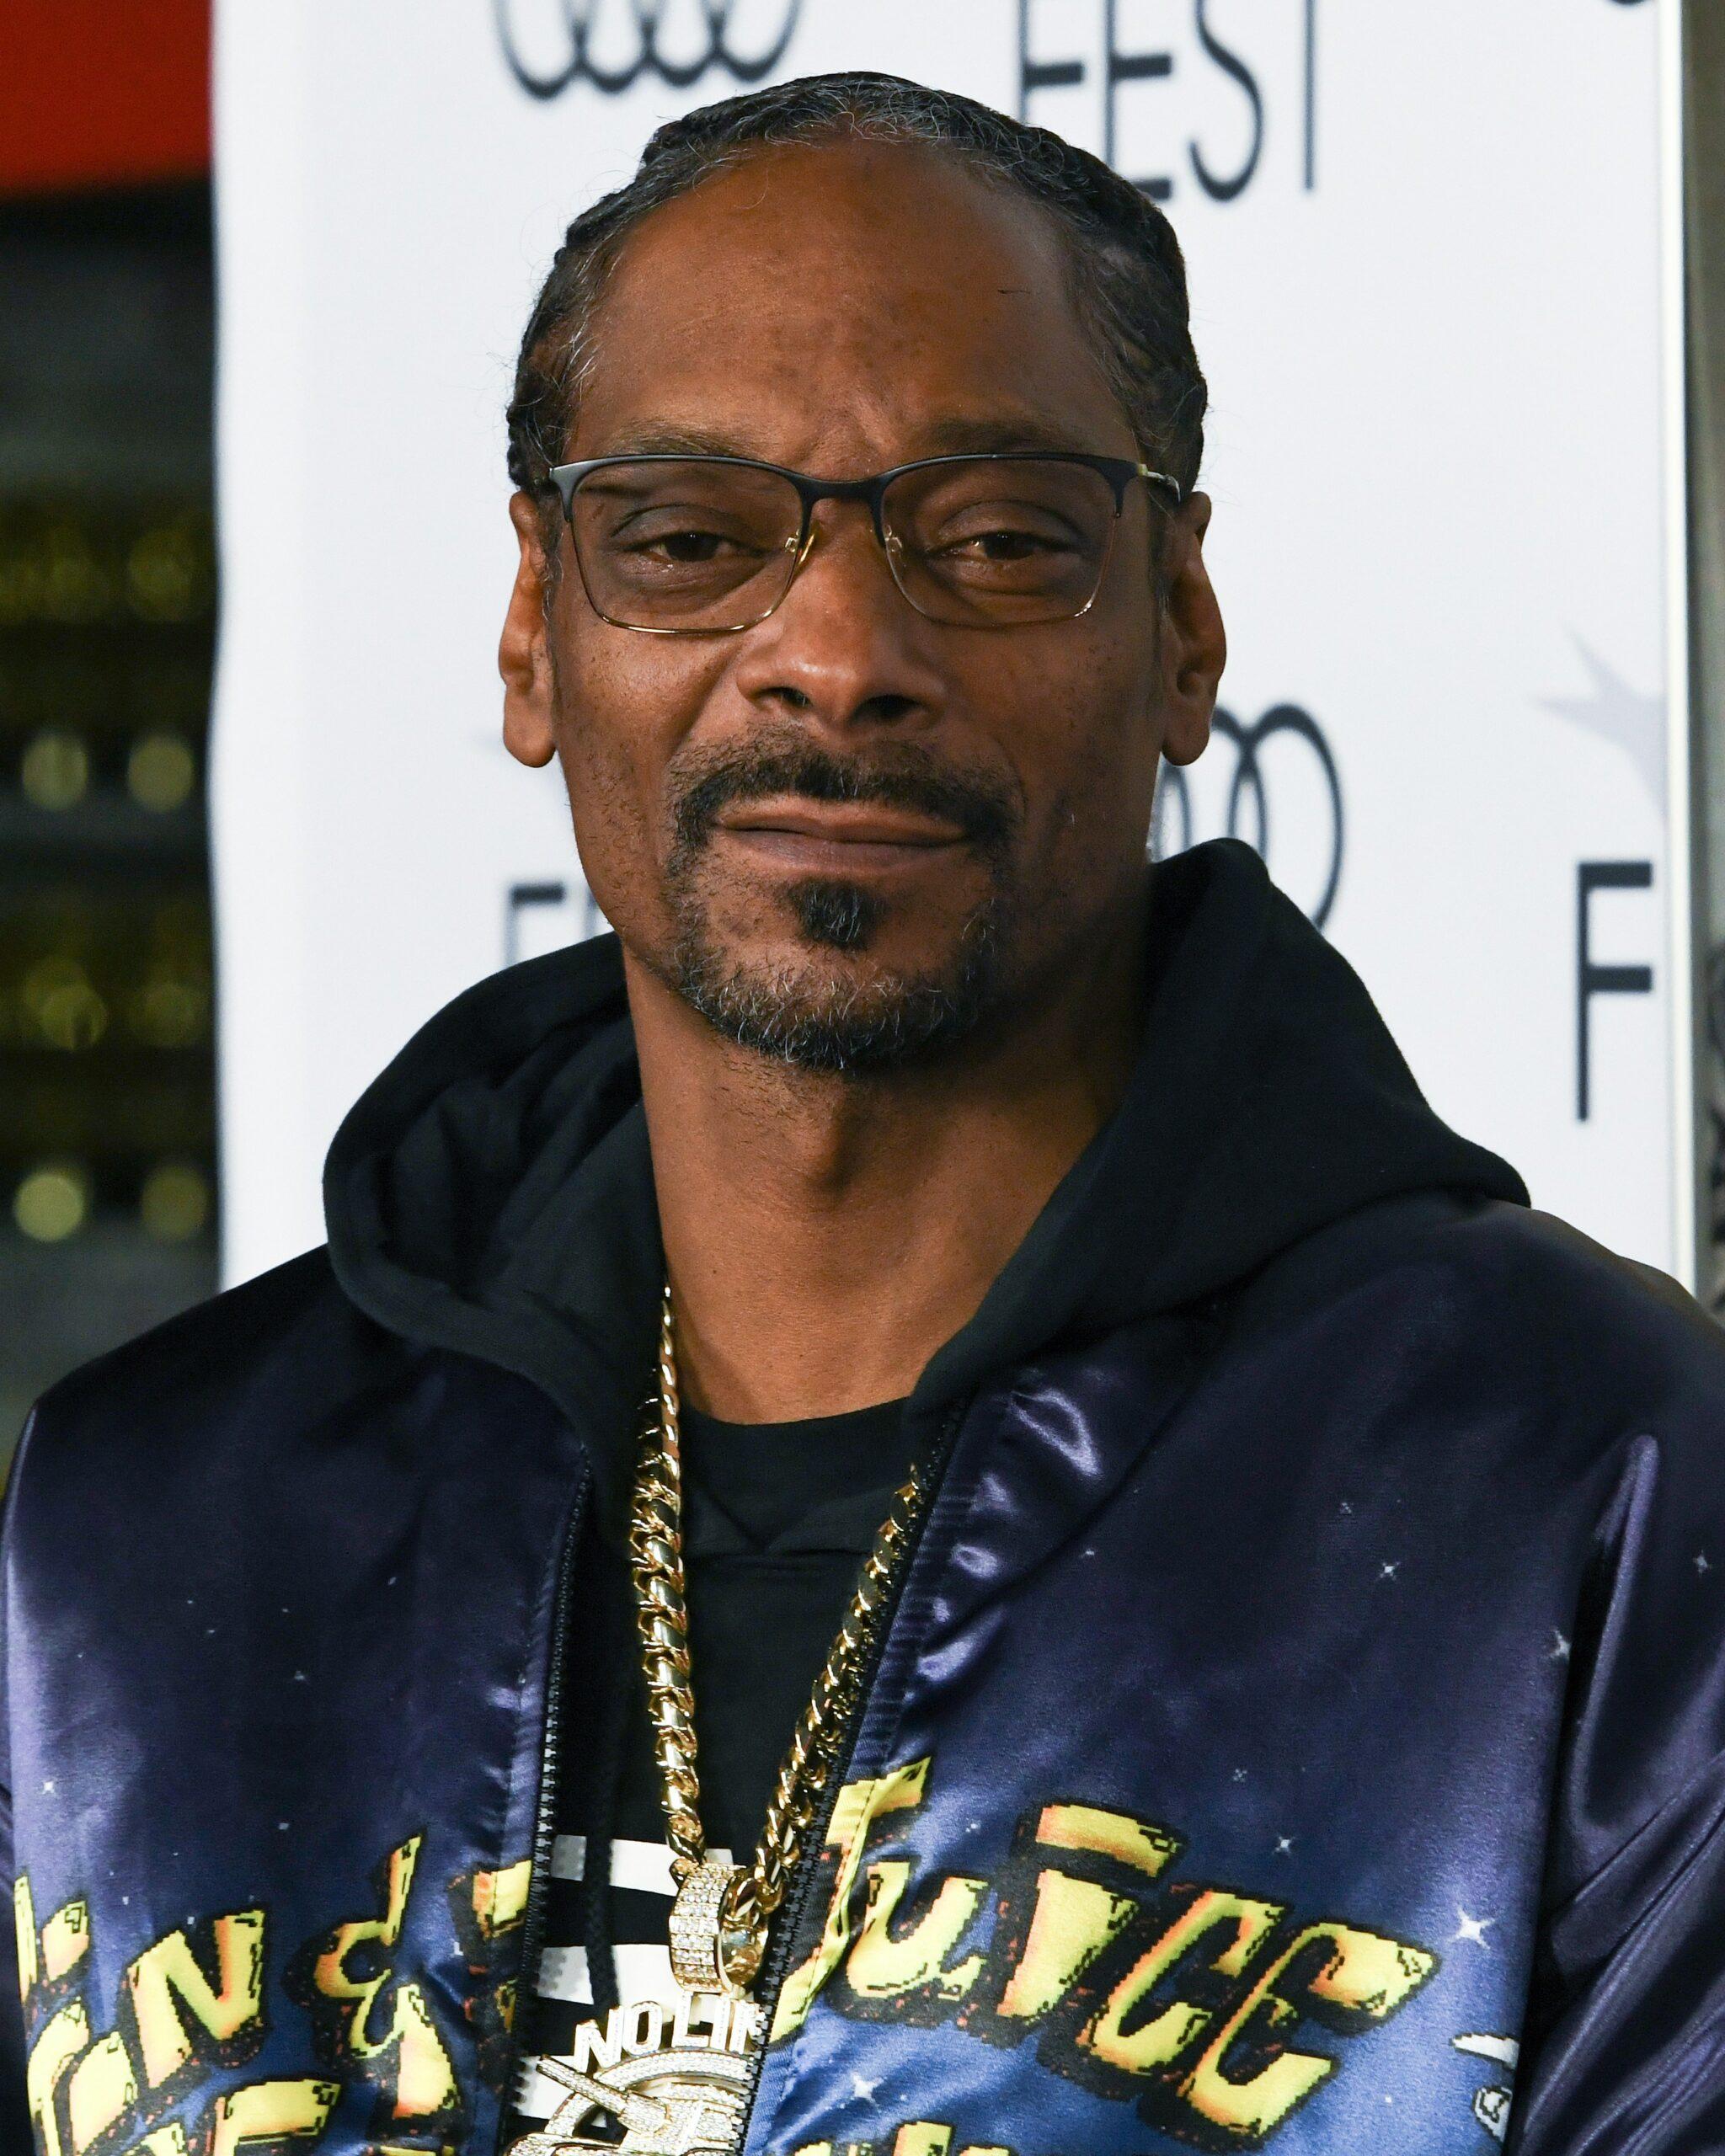 A photo showing Snoop Dogg in a hoodie